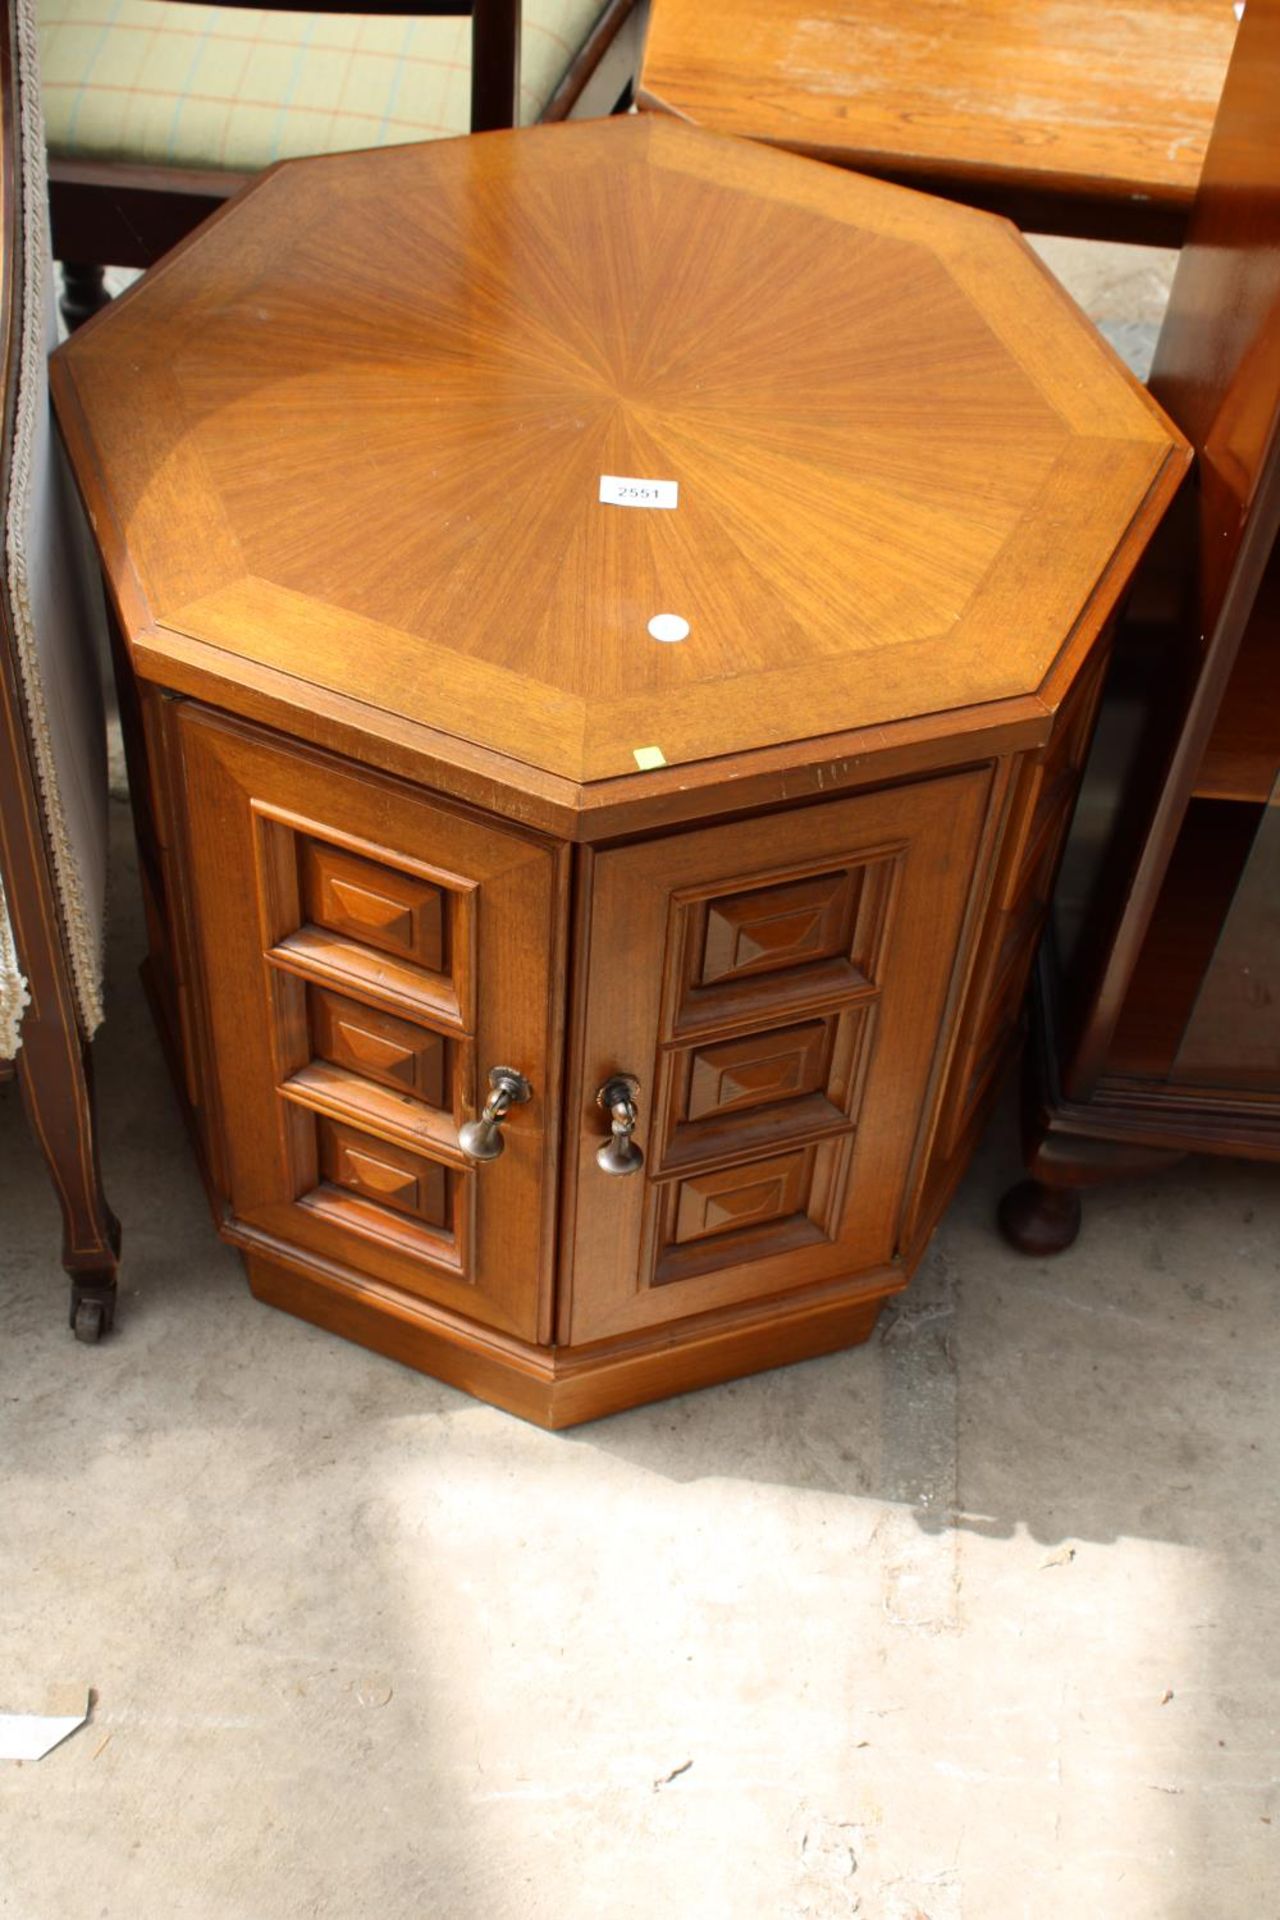 A MODERN OCTAGONAL A.S.F. & CO CUPBOARD WITH INLAID TOP AND PANELLED DOORS, 24" ACROSS